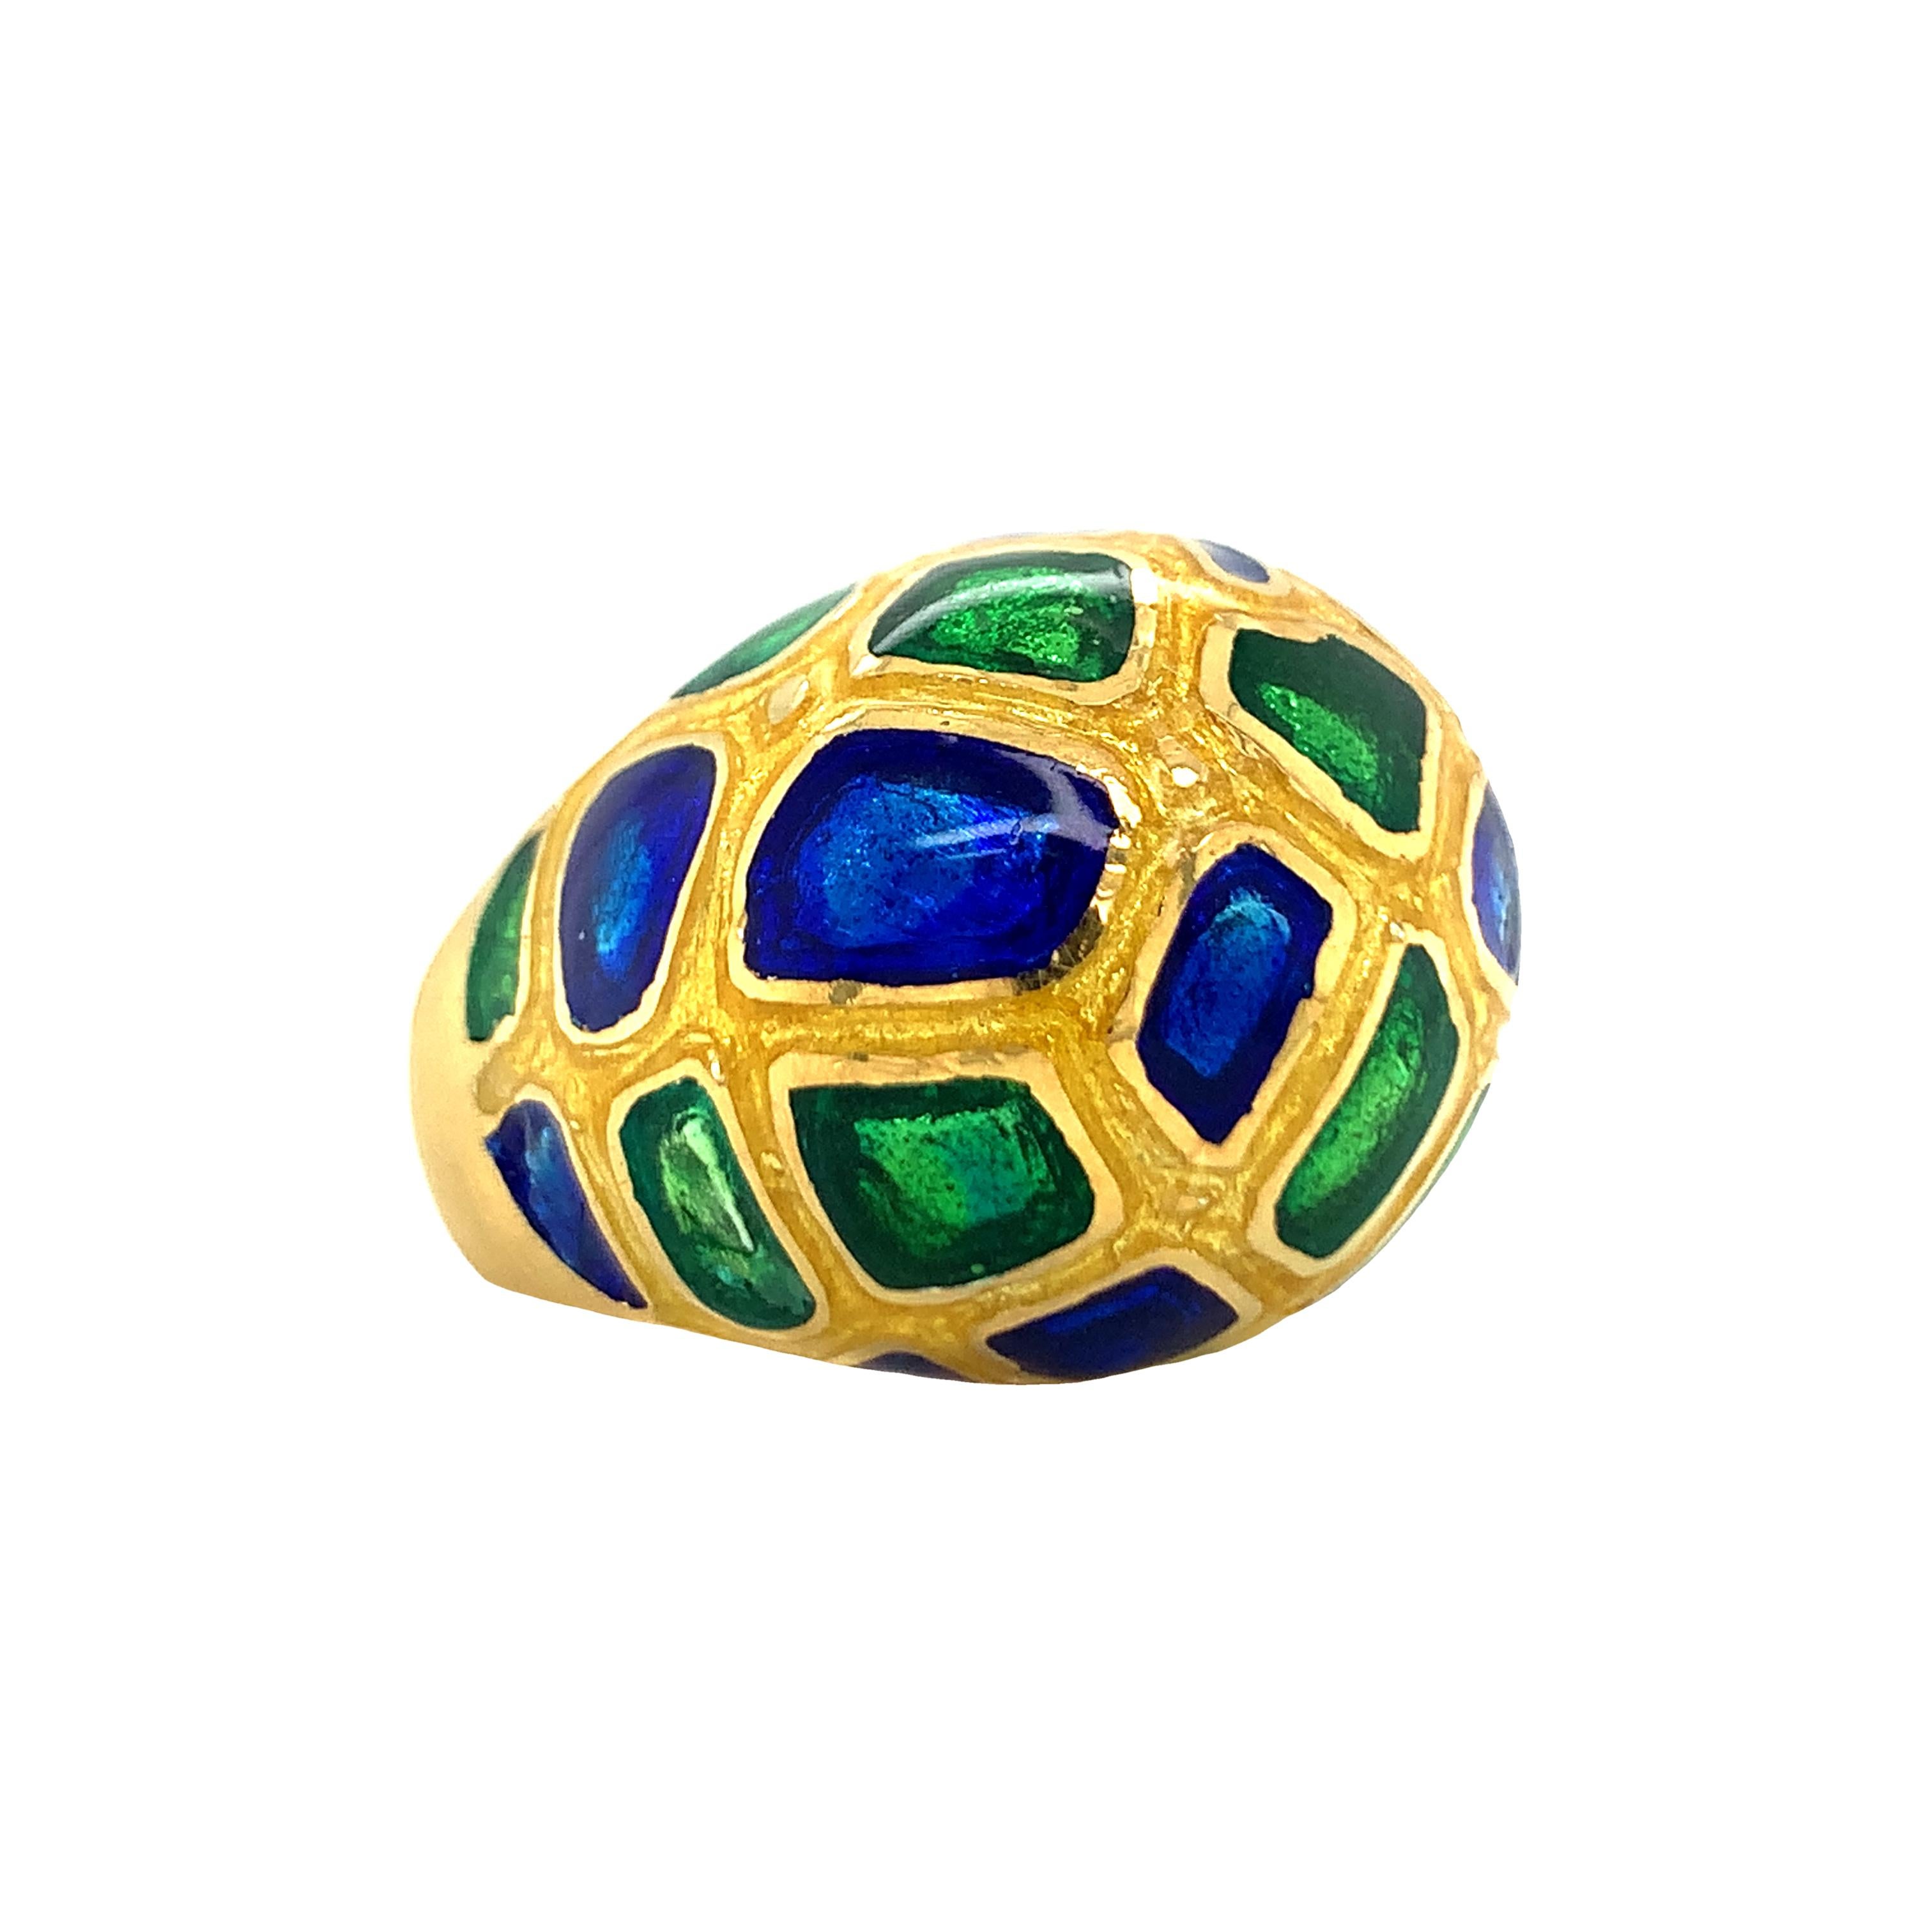 14K yellow gold blue, green, yellow enamel dome ring with satin finish gold work throughout. Measures 23 x 20 millimeters in size and 12 millimeters high when worn upon finger. Attributed to “Martin” though unstamped and with matching bangle